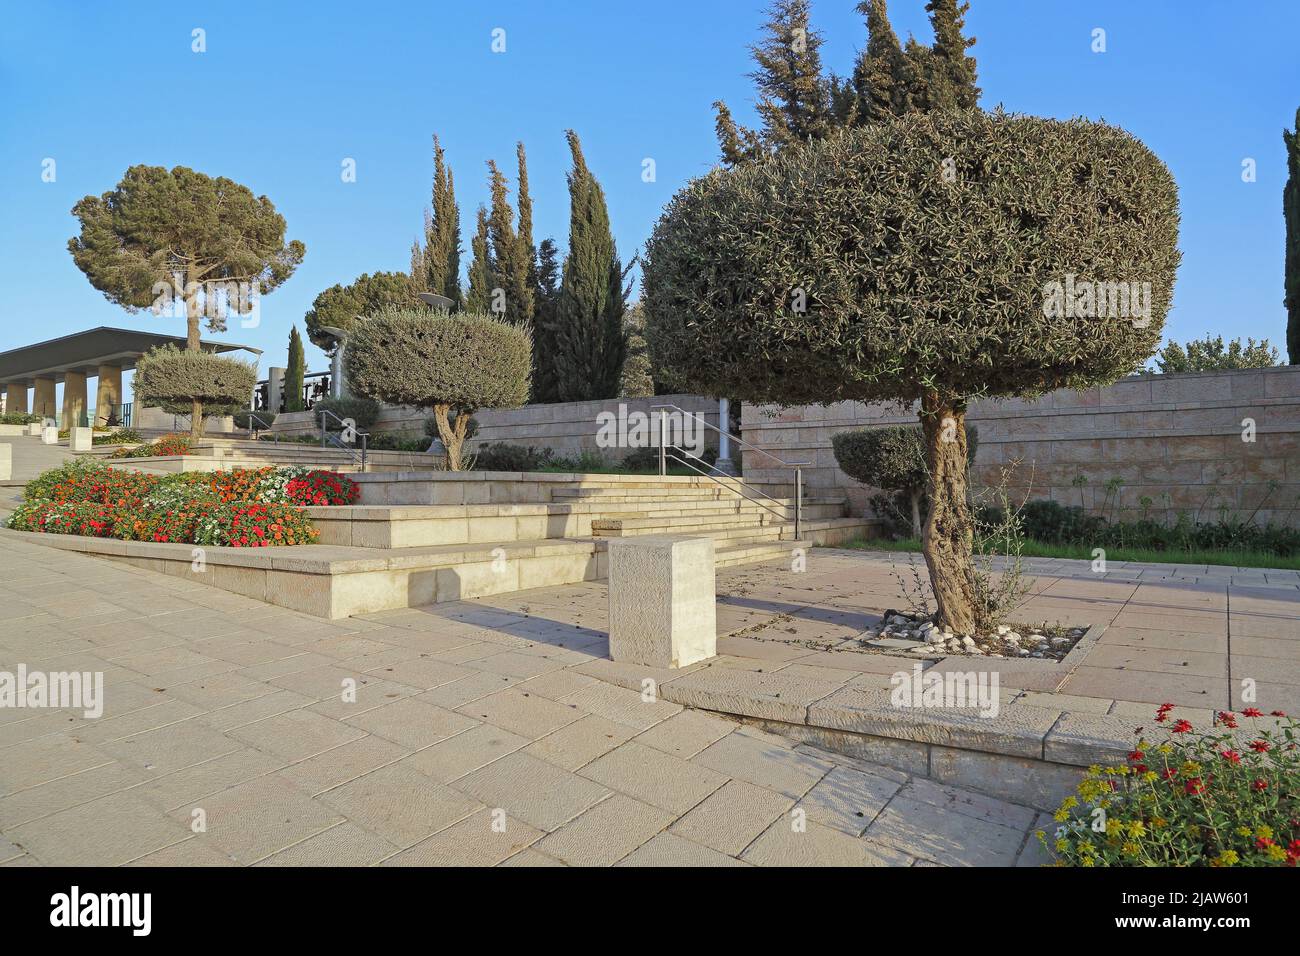 JERUSALEM, ISRAEL - SEPTEMBER 24, 2017: This is Rothschild Street leading to the entrance to the Knesset grounds. Stock Photo